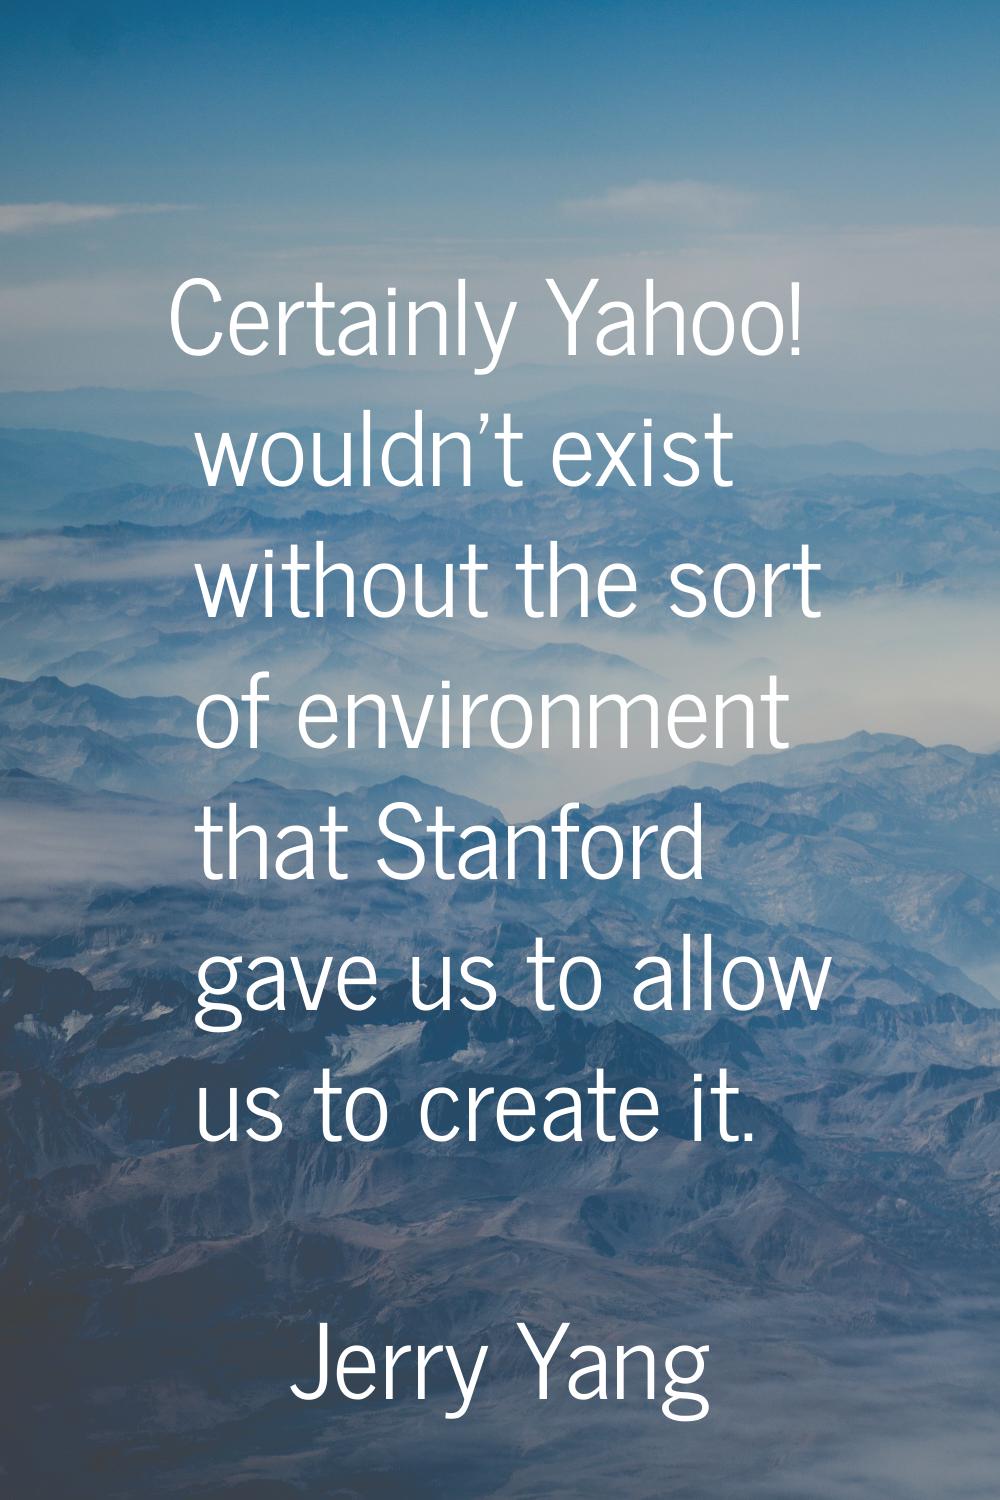 Certainly Yahoo! wouldn't exist without the sort of environment that Stanford gave us to allow us t